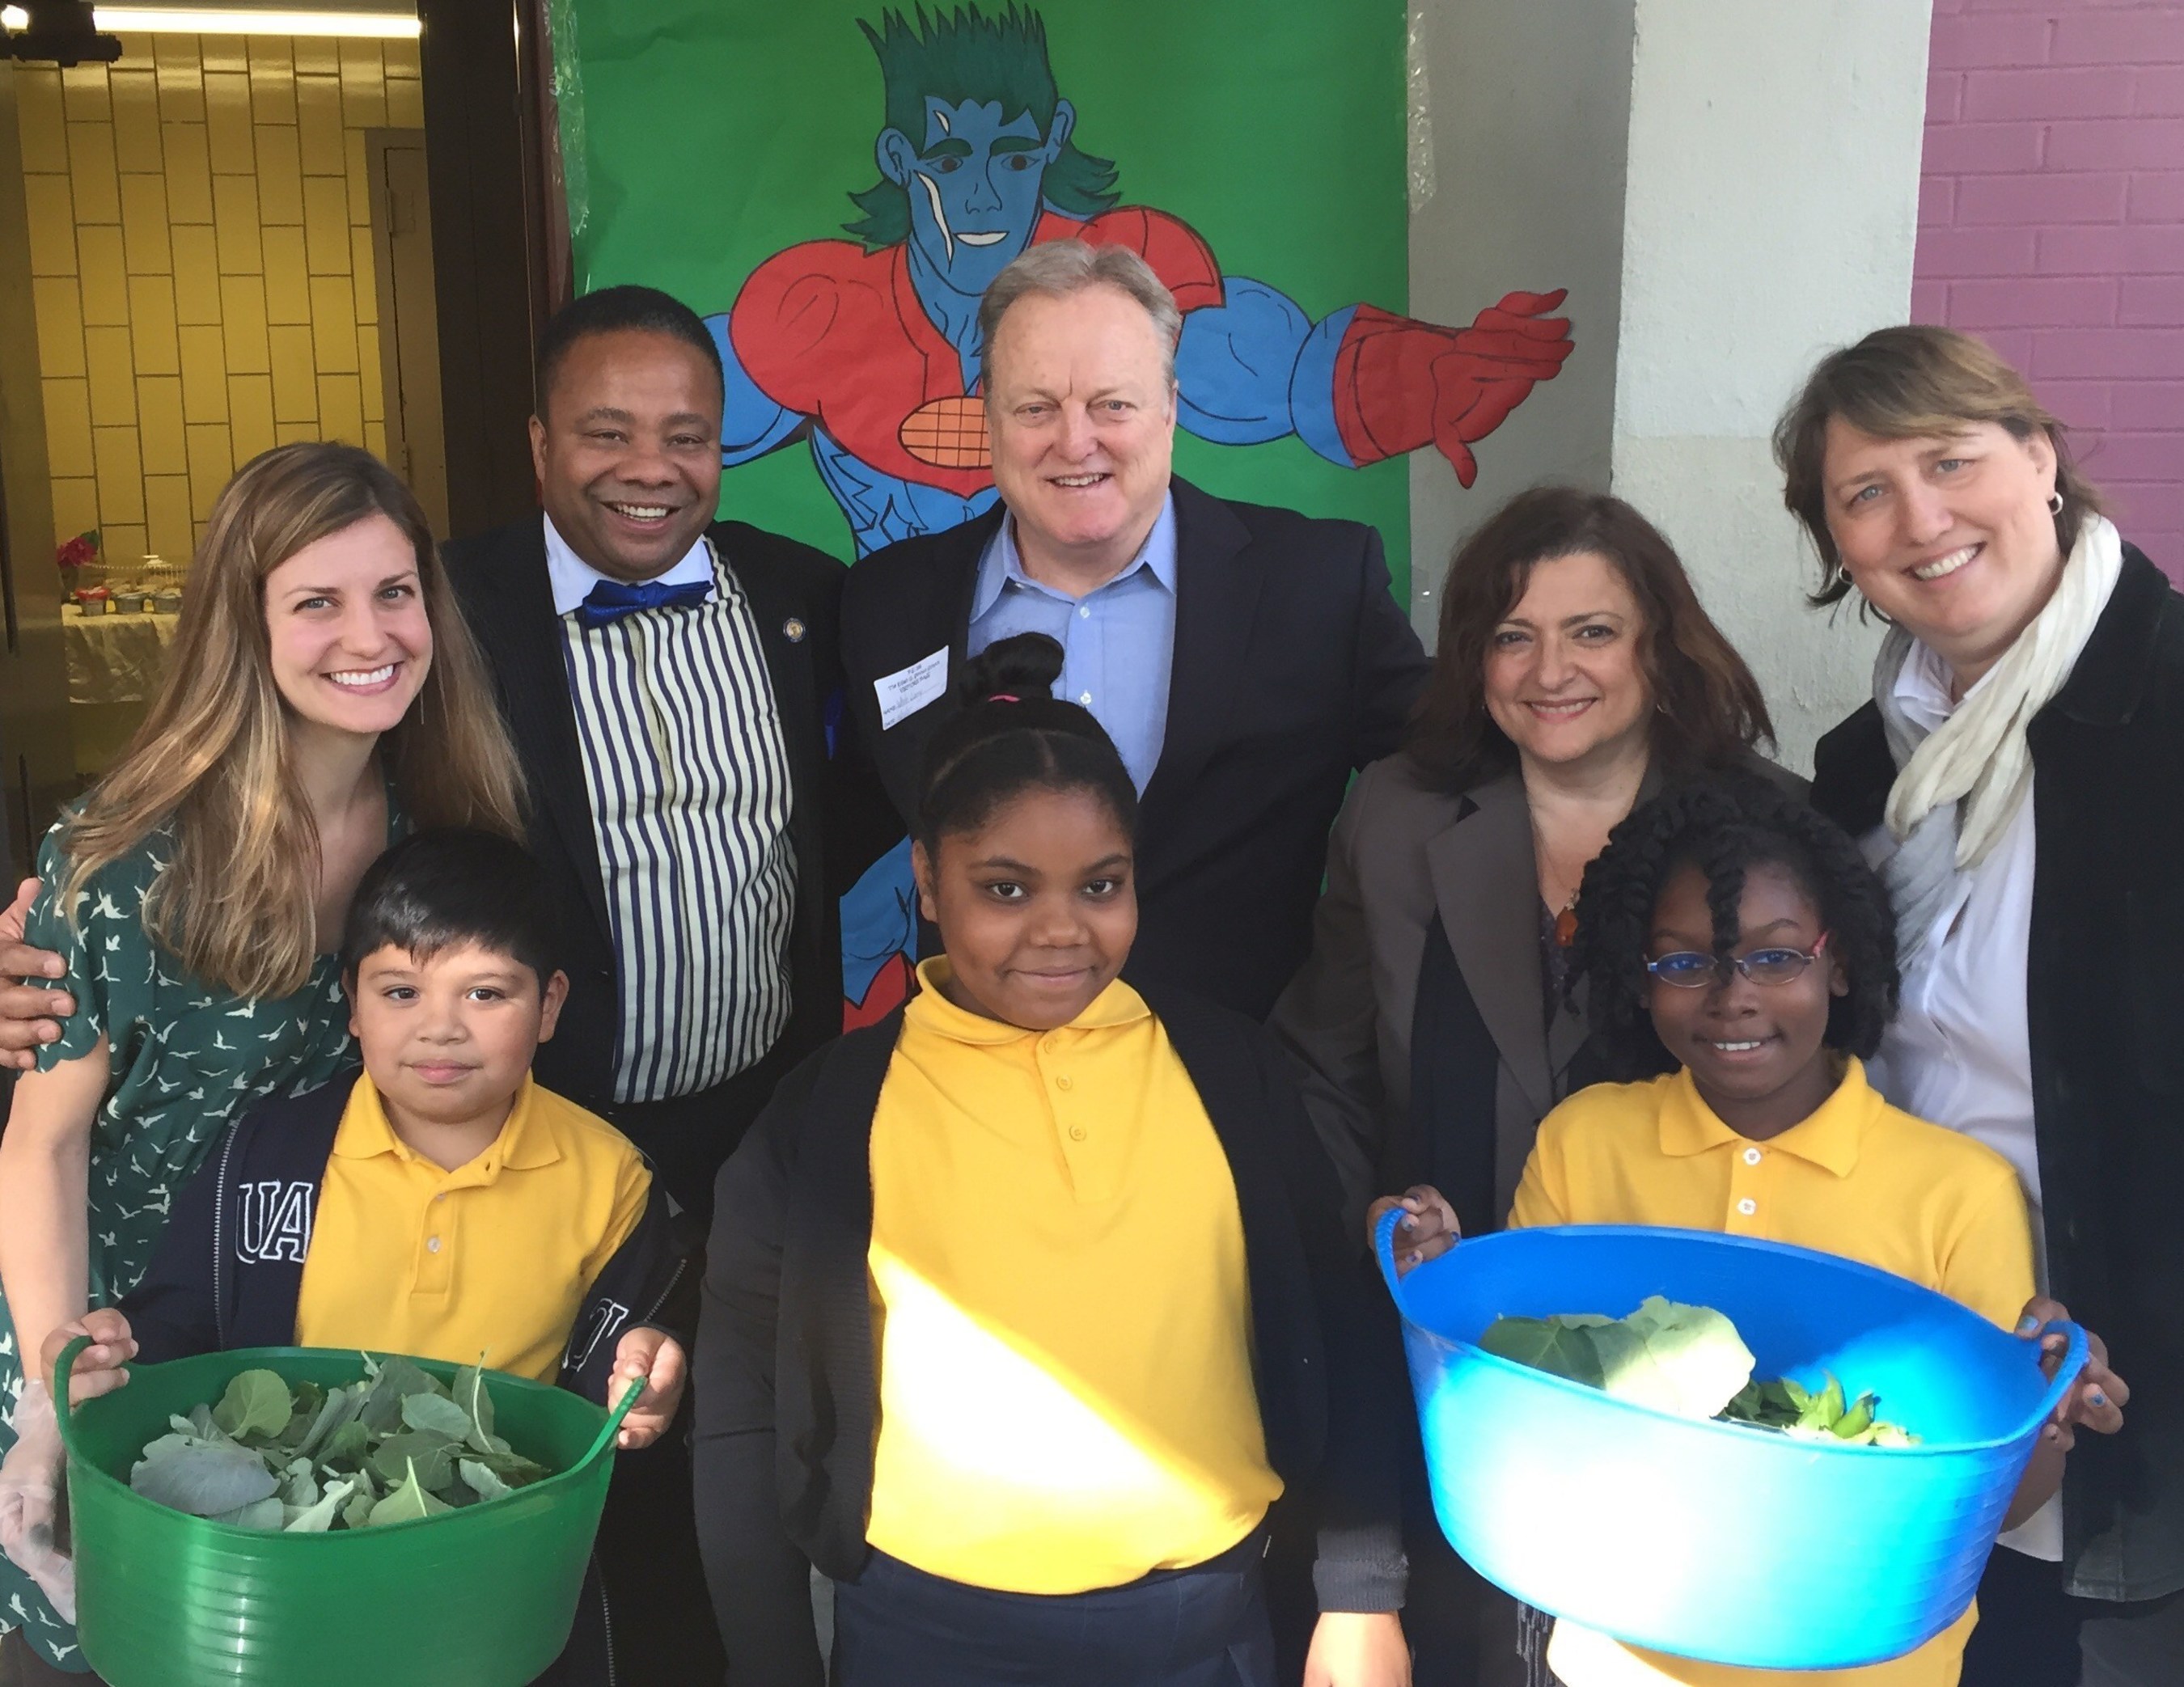 From left to right, Julie Kowalchick, PS 316 Elijah Stroud Elementary School Science Teacher, NY State Senator Jesse Hamilton, Larry White - VP Sales, Dole Packaged Foods, Principal Olaf Maluf, PS 316 and Leesa Carter, Executive Director, Captain Planet Foundation are joined by students from PS 316 Elijah Stroud Elementary School with salad greens from their new Learning Garden funded by Dole Packaged Foods and Key Food Stores.